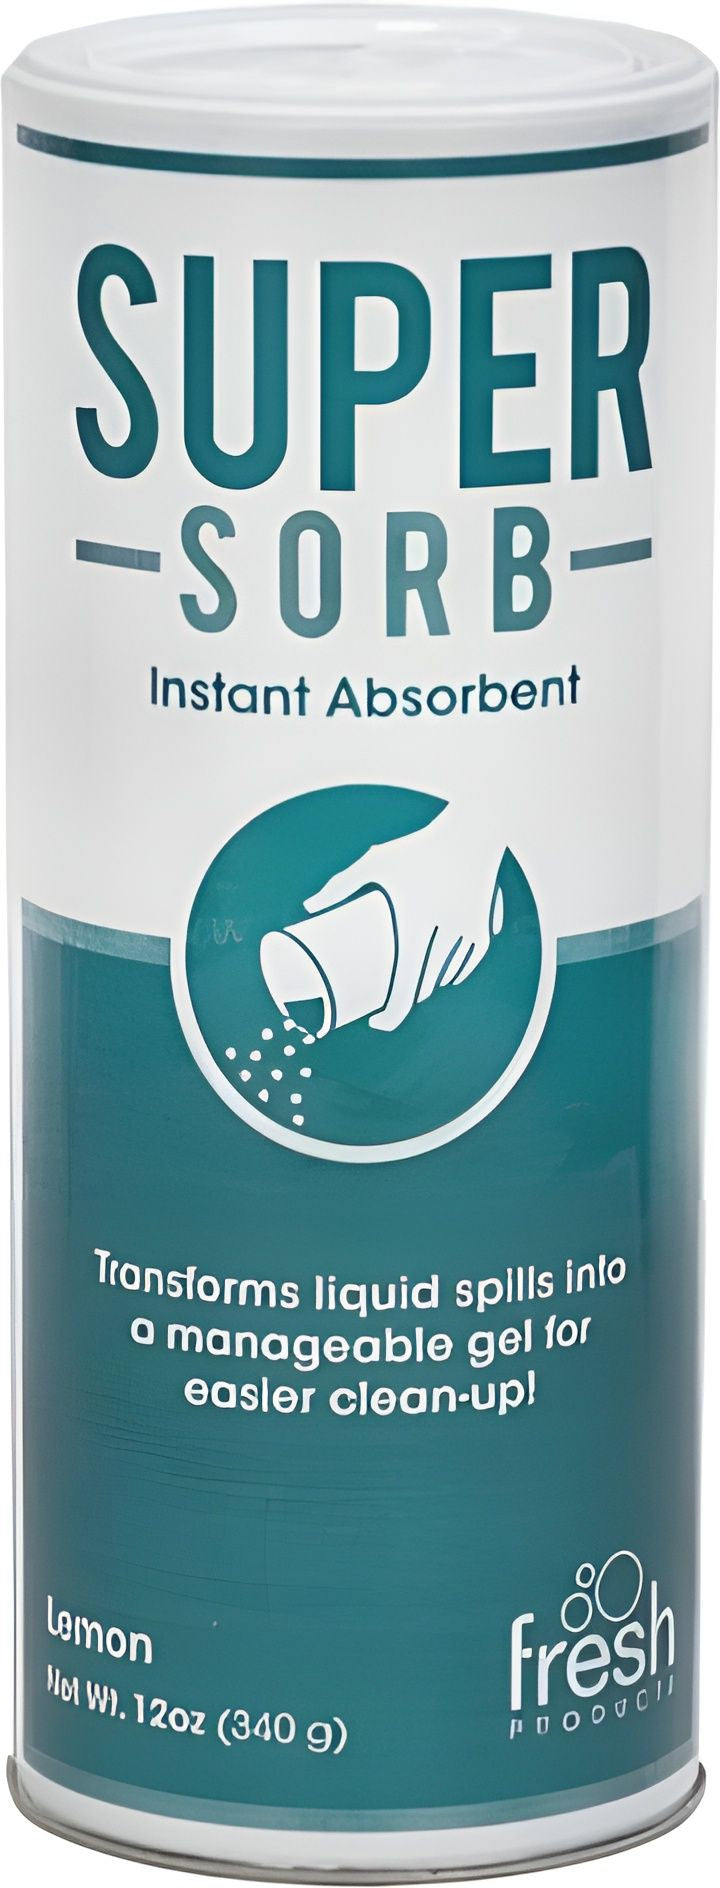 Fresh Products - Supersorb Instant Spill Liquid Absorbent Powder Lemon Scented, 12 Oz Per Can - 185839